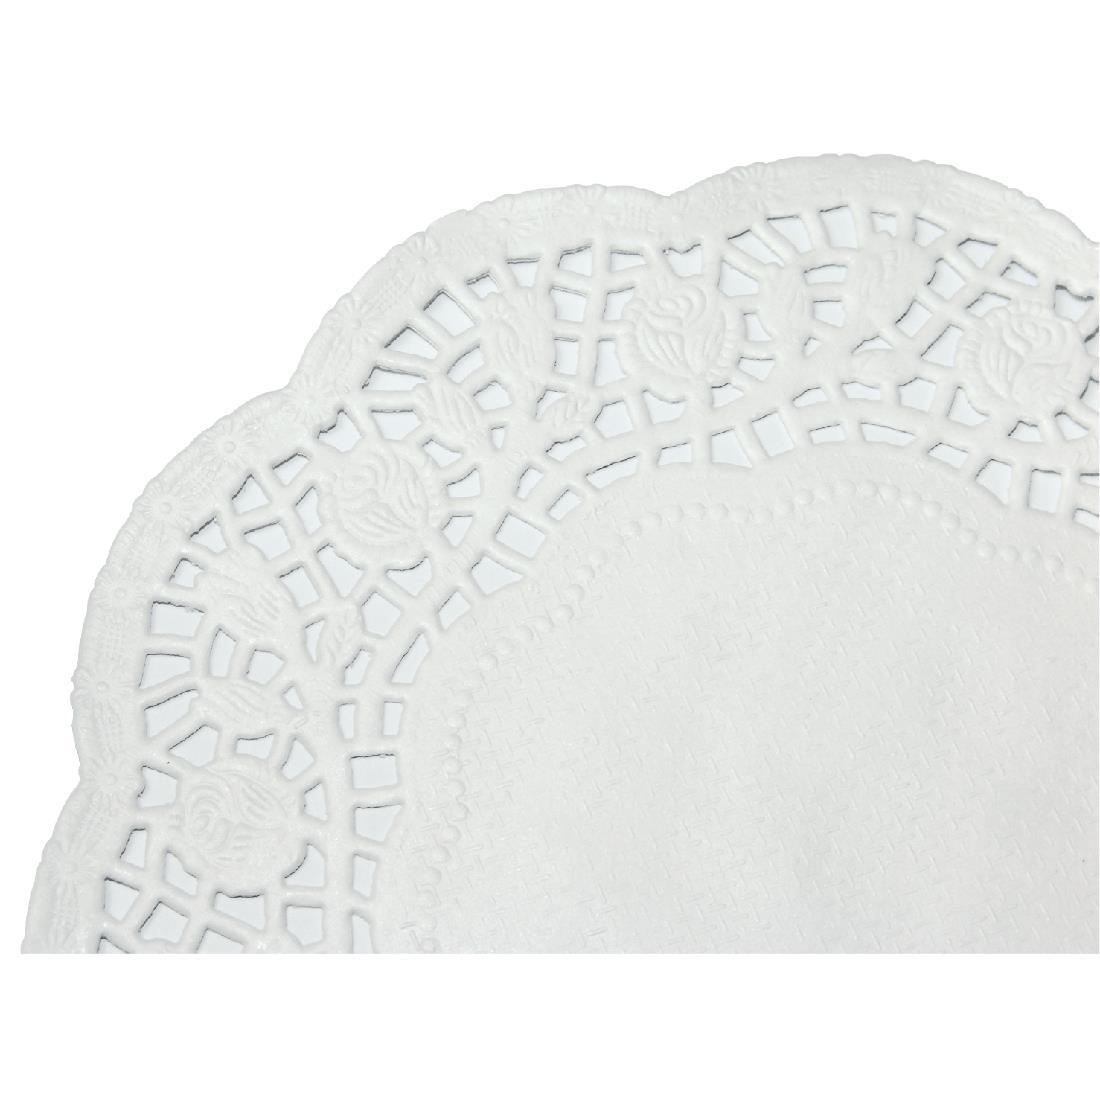 Fiesta Round Paper Doilies 300mm (Pack of 250) - CE993  - 3